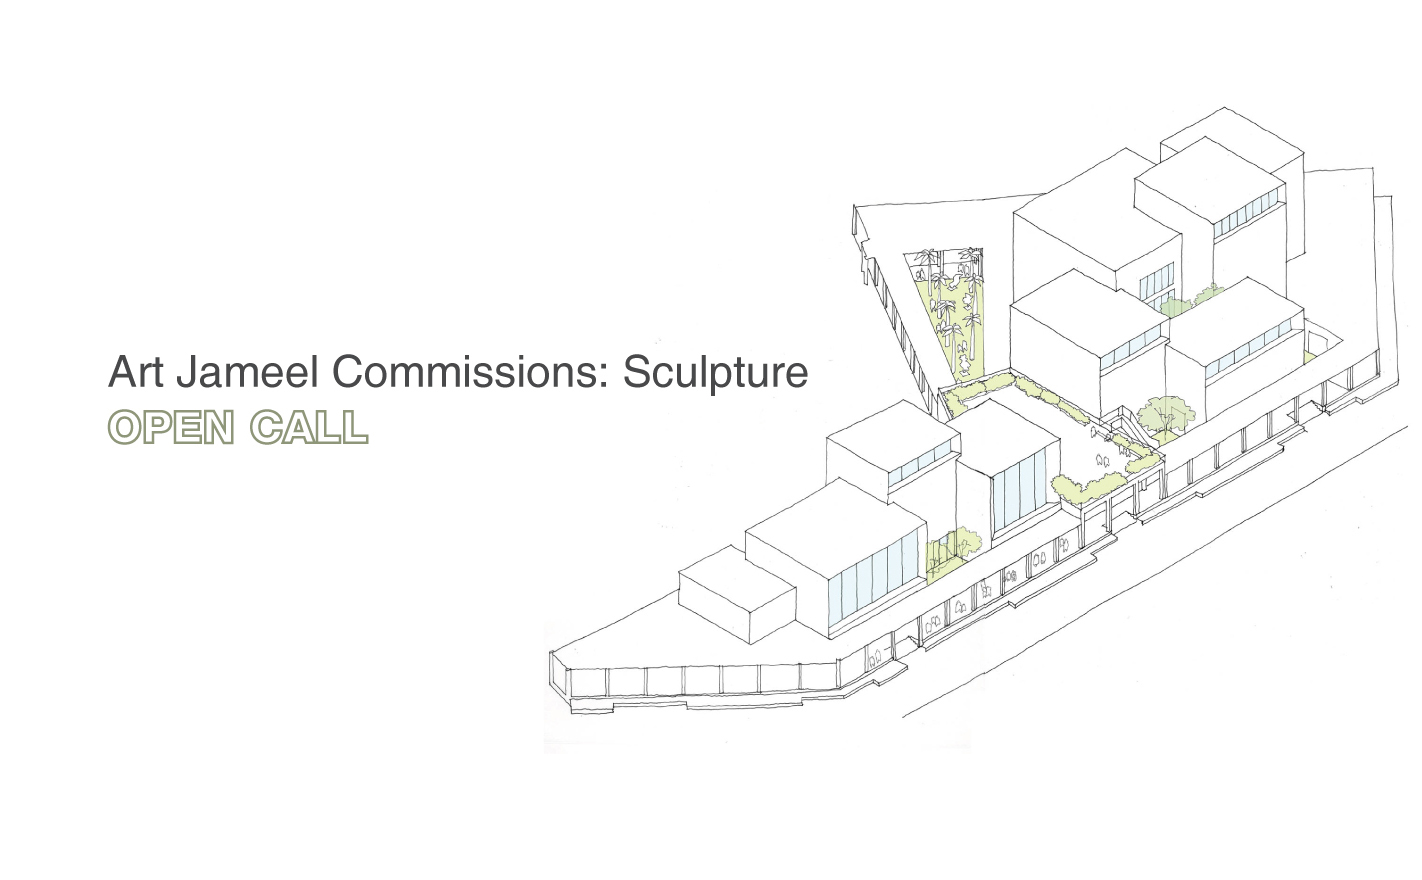 Art Jameel Commissions: Sculpture supplementary visuals and FAQs